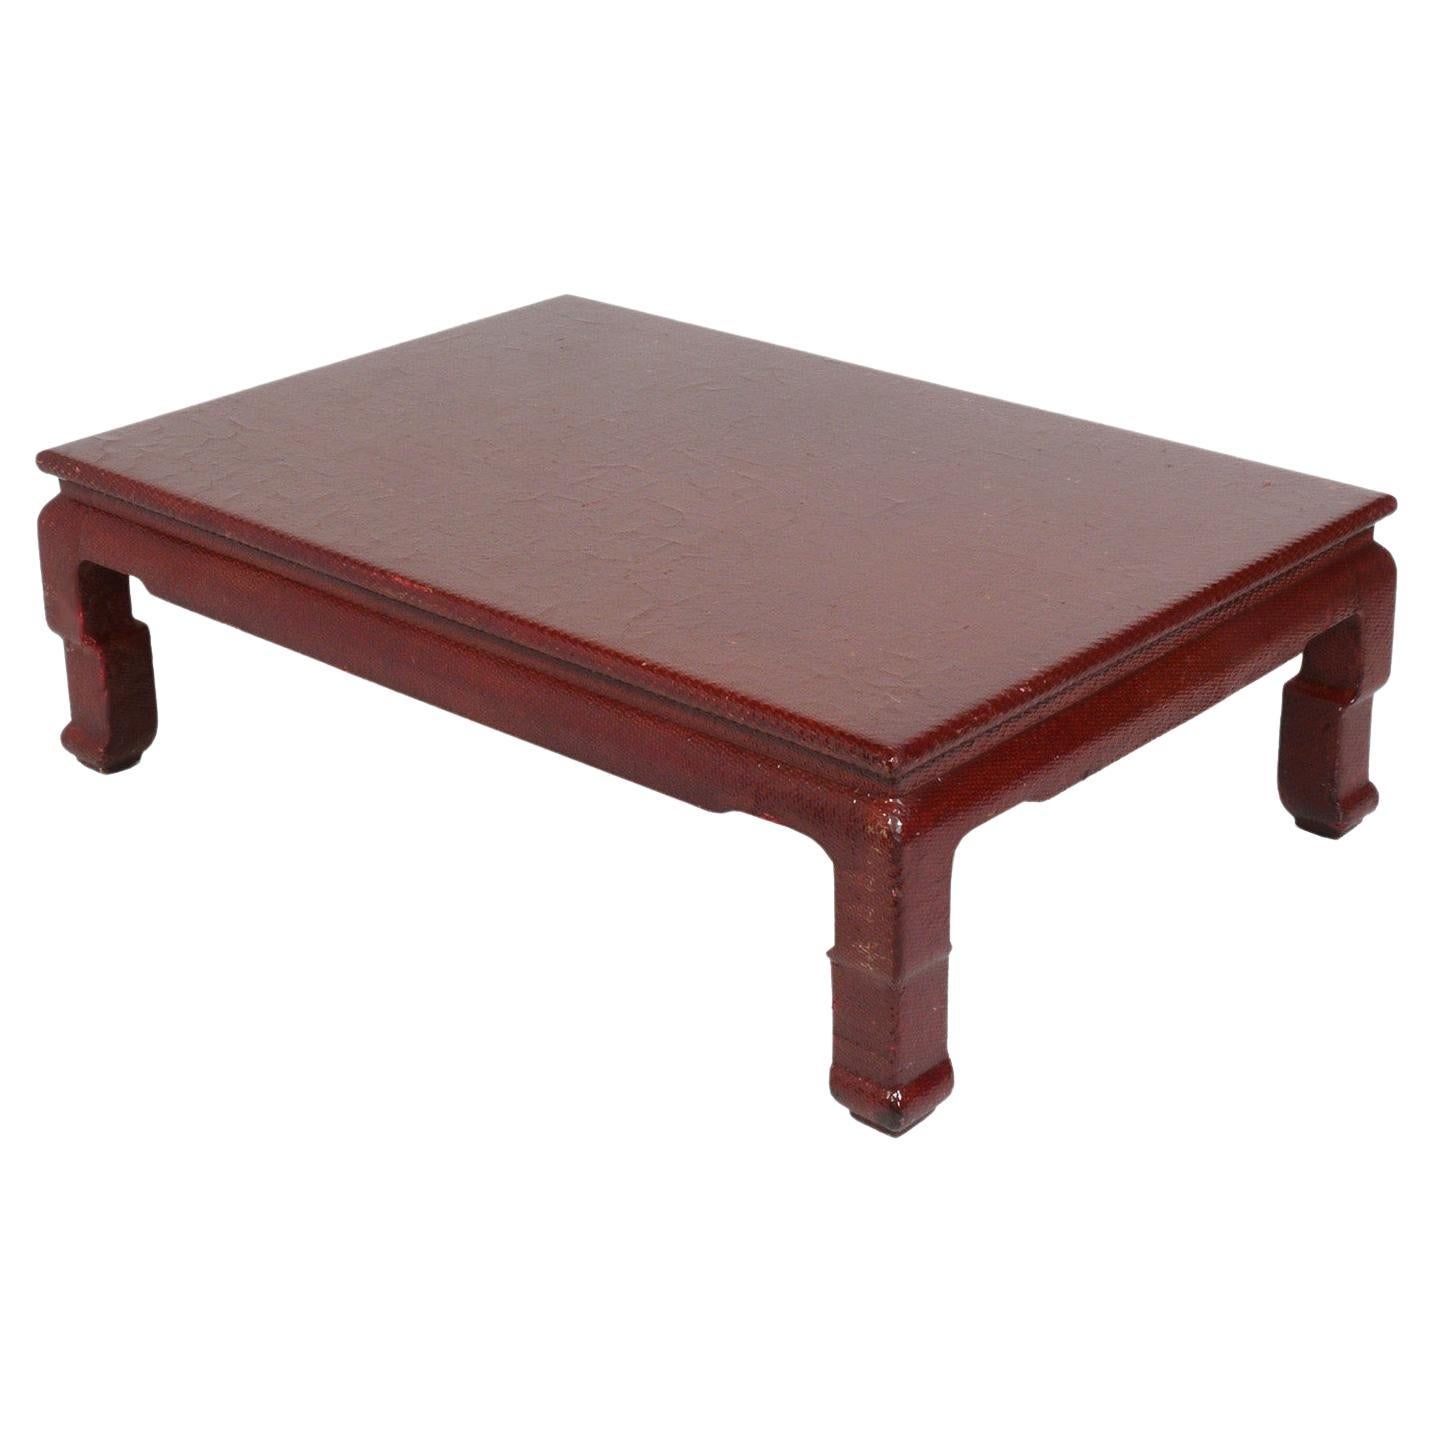 Chinoiserie Raffia Wrapped Coffee Table Refinished In Your Choice of Color For Sale